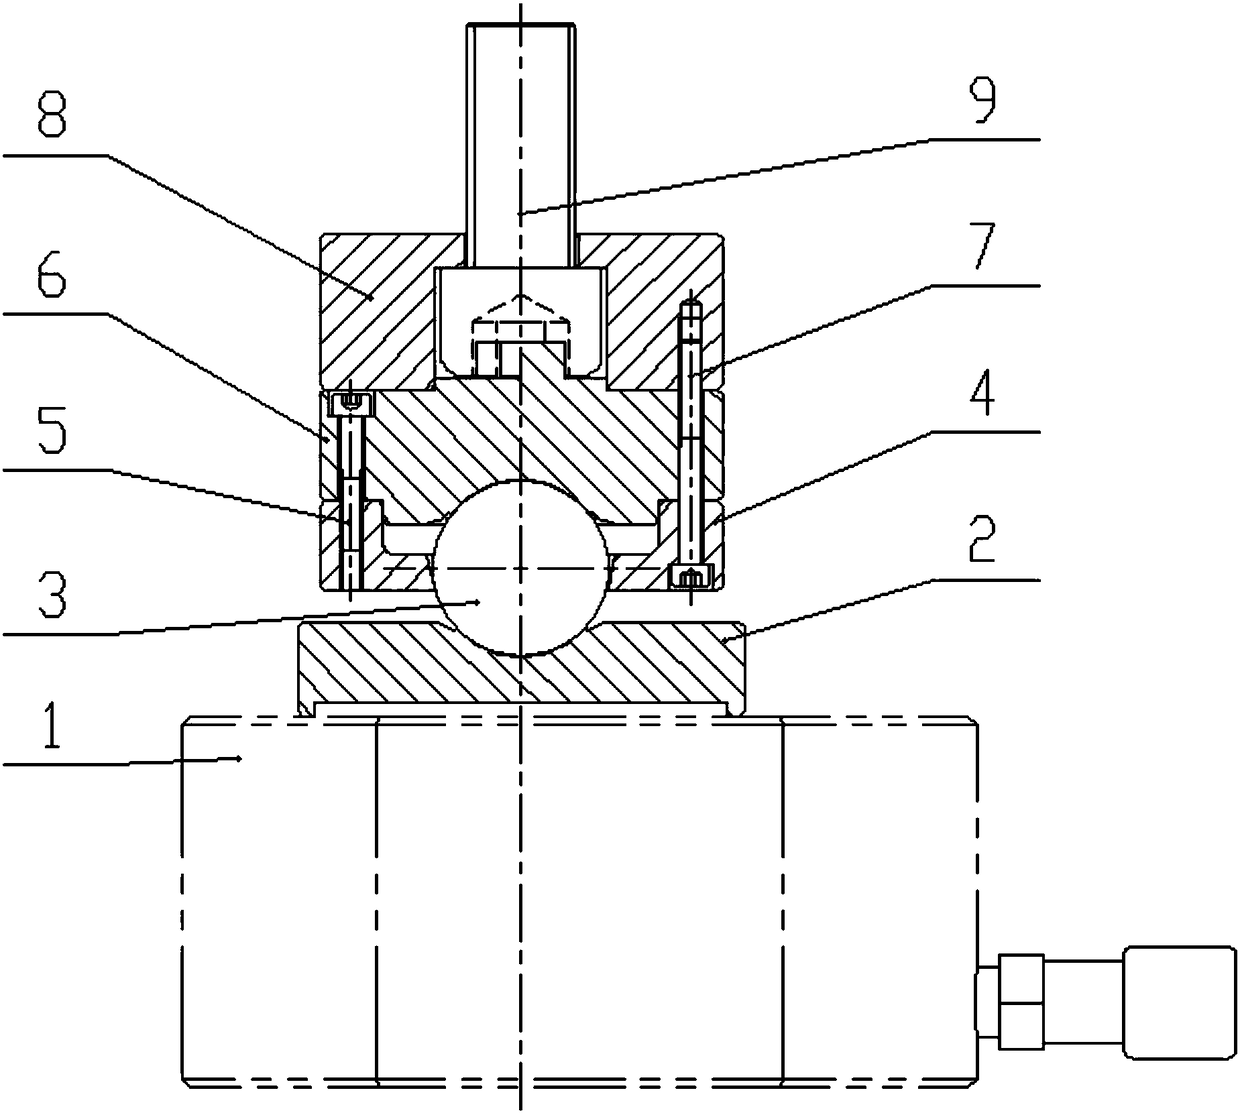 Adaptive connecting device used for main pump motor top shaft